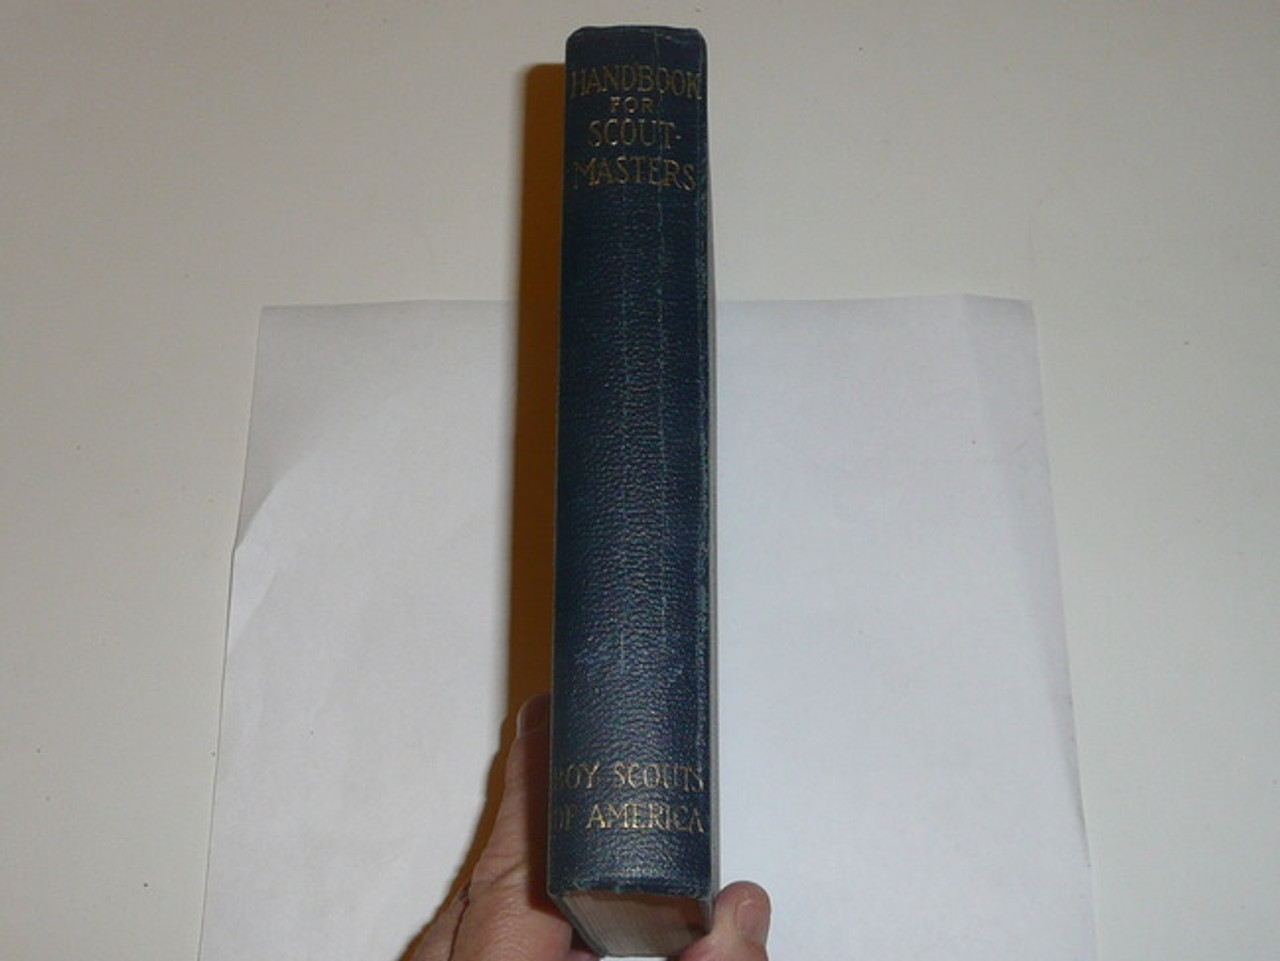 1922 Handbook For Scoutmasters, Second Edition, Third Printing, MINT Condition, black cover